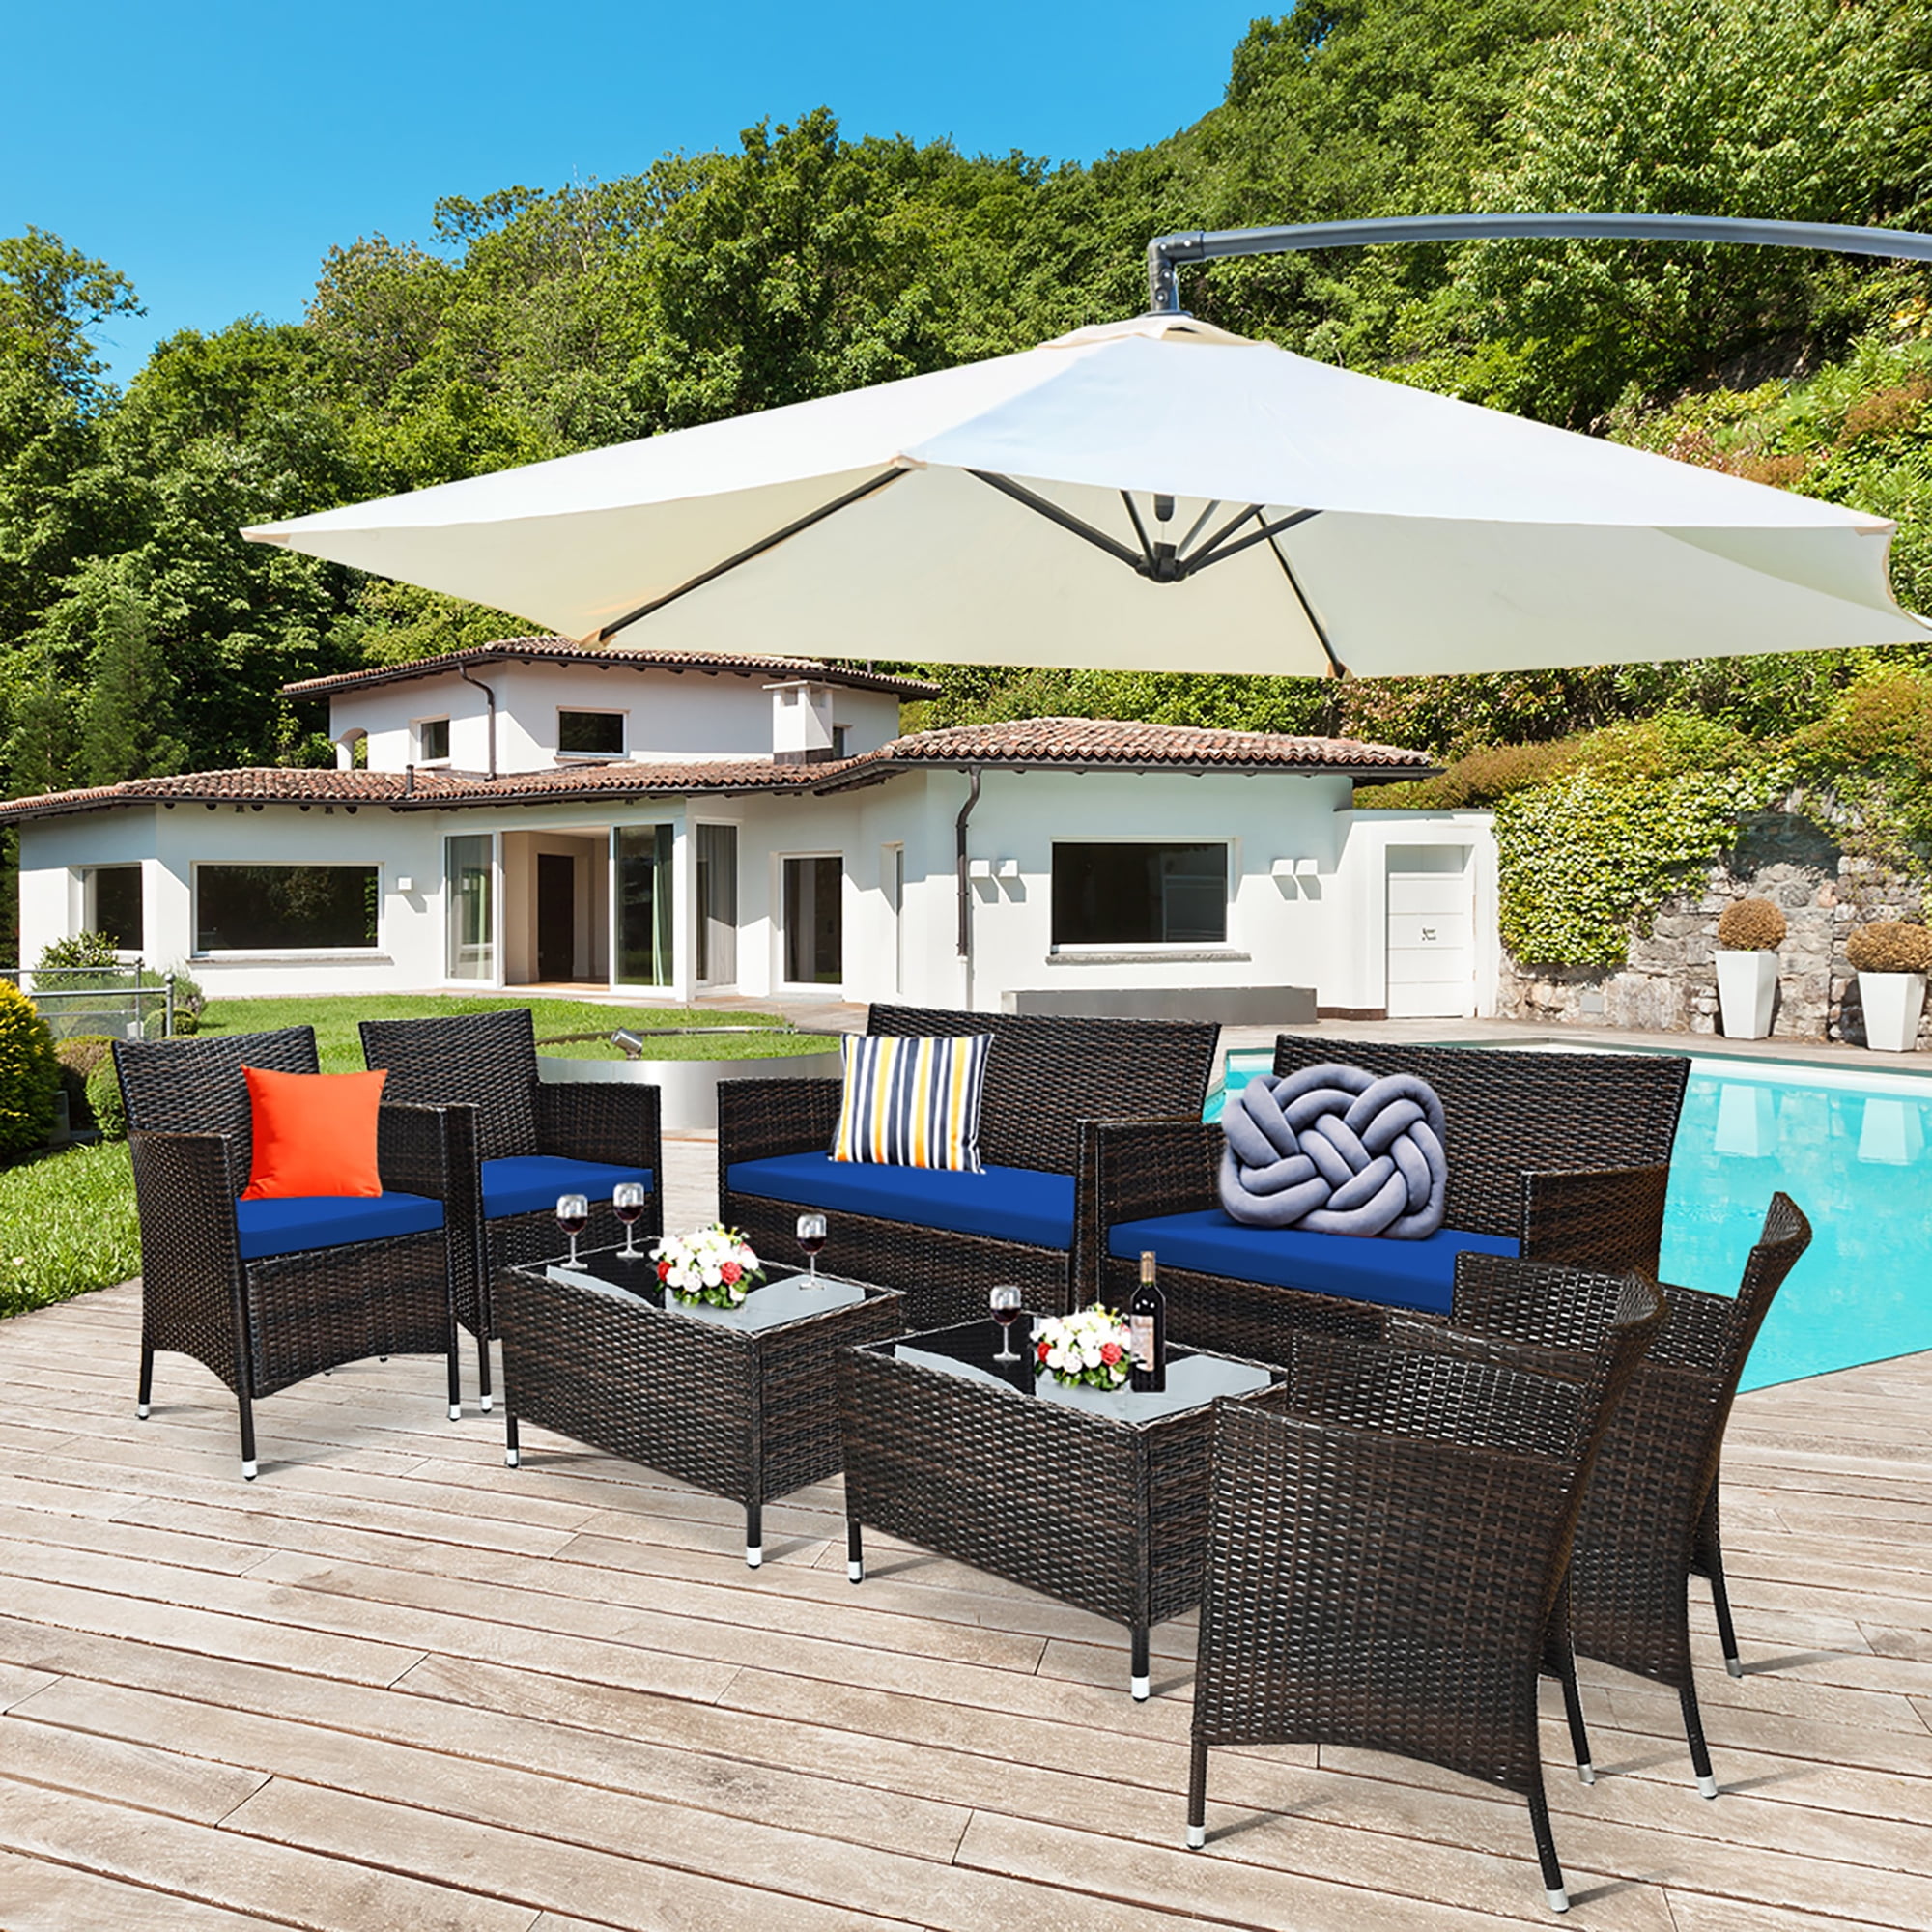 Costway 8PCS Rattan Patio Furniture Set Cushioned Sofa Chair Coffee Table Navy